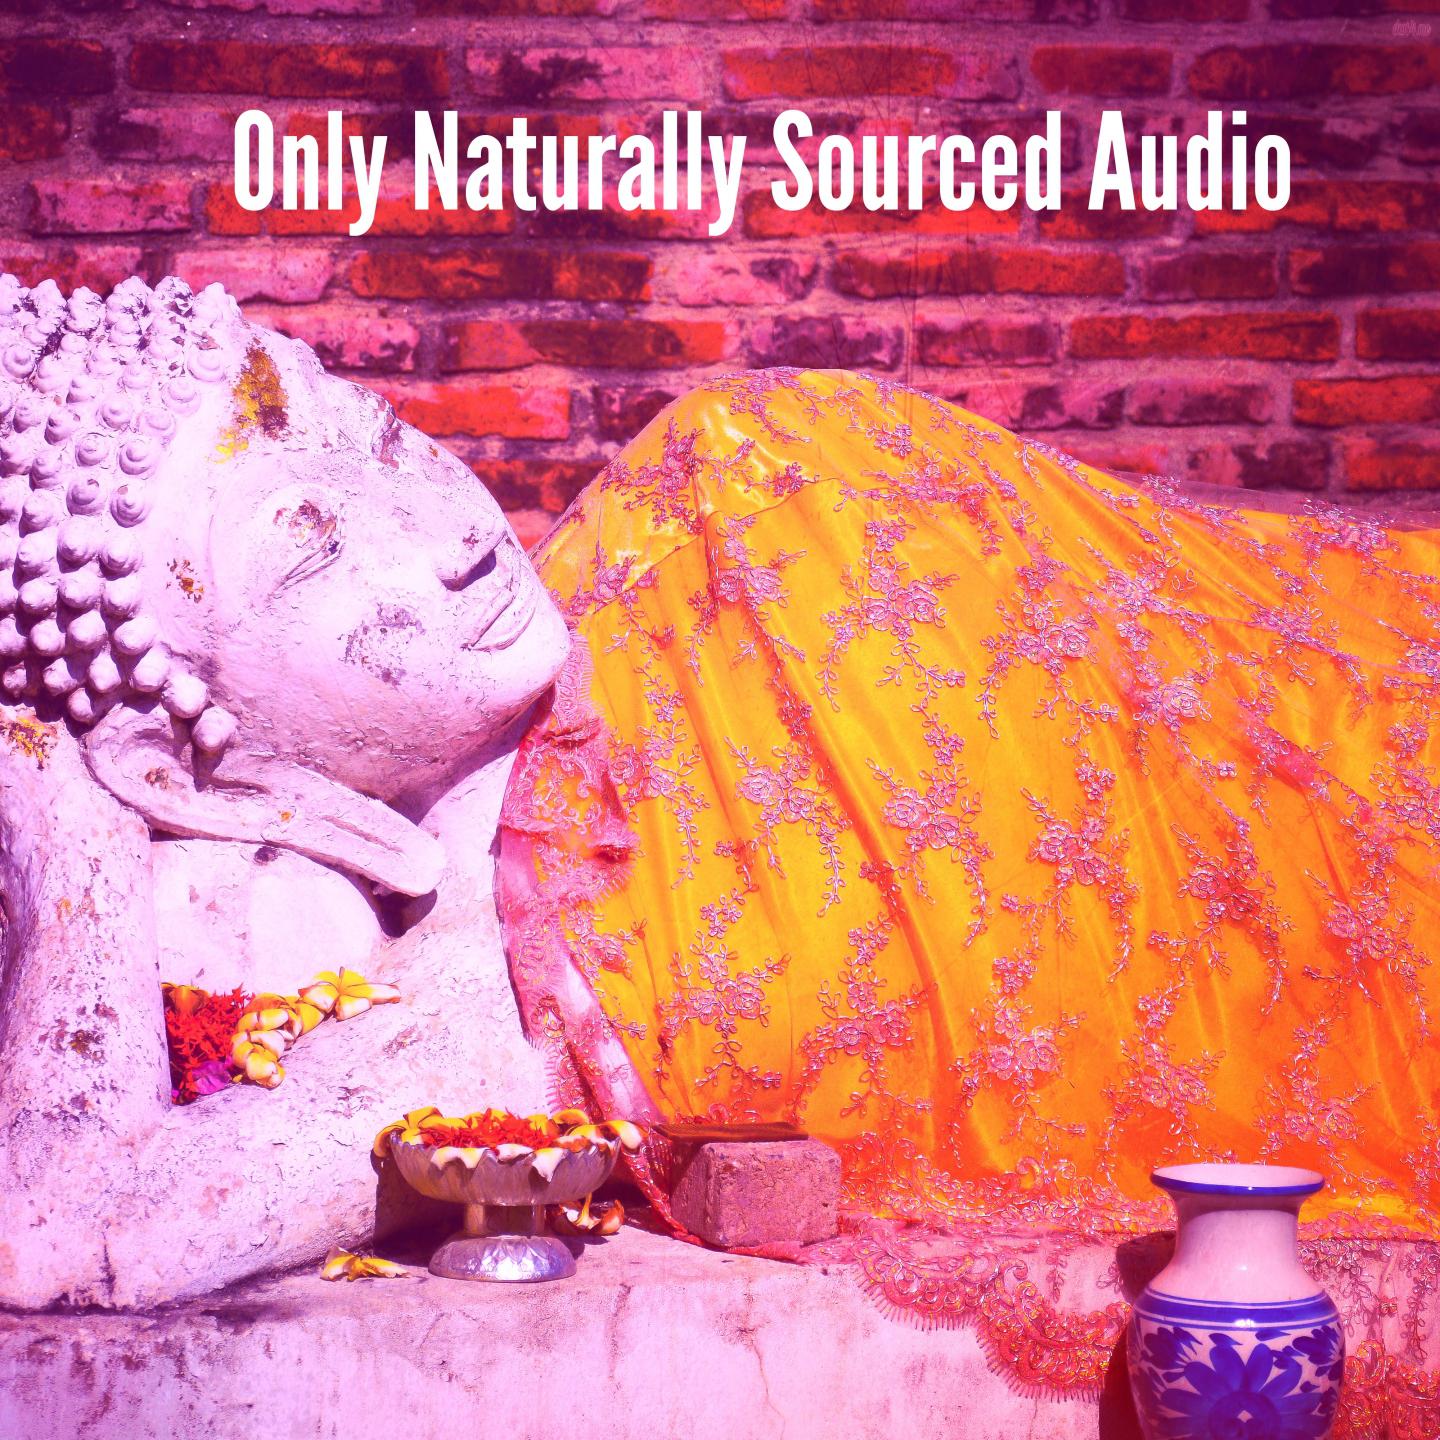 Only Naturally Sourced Audio